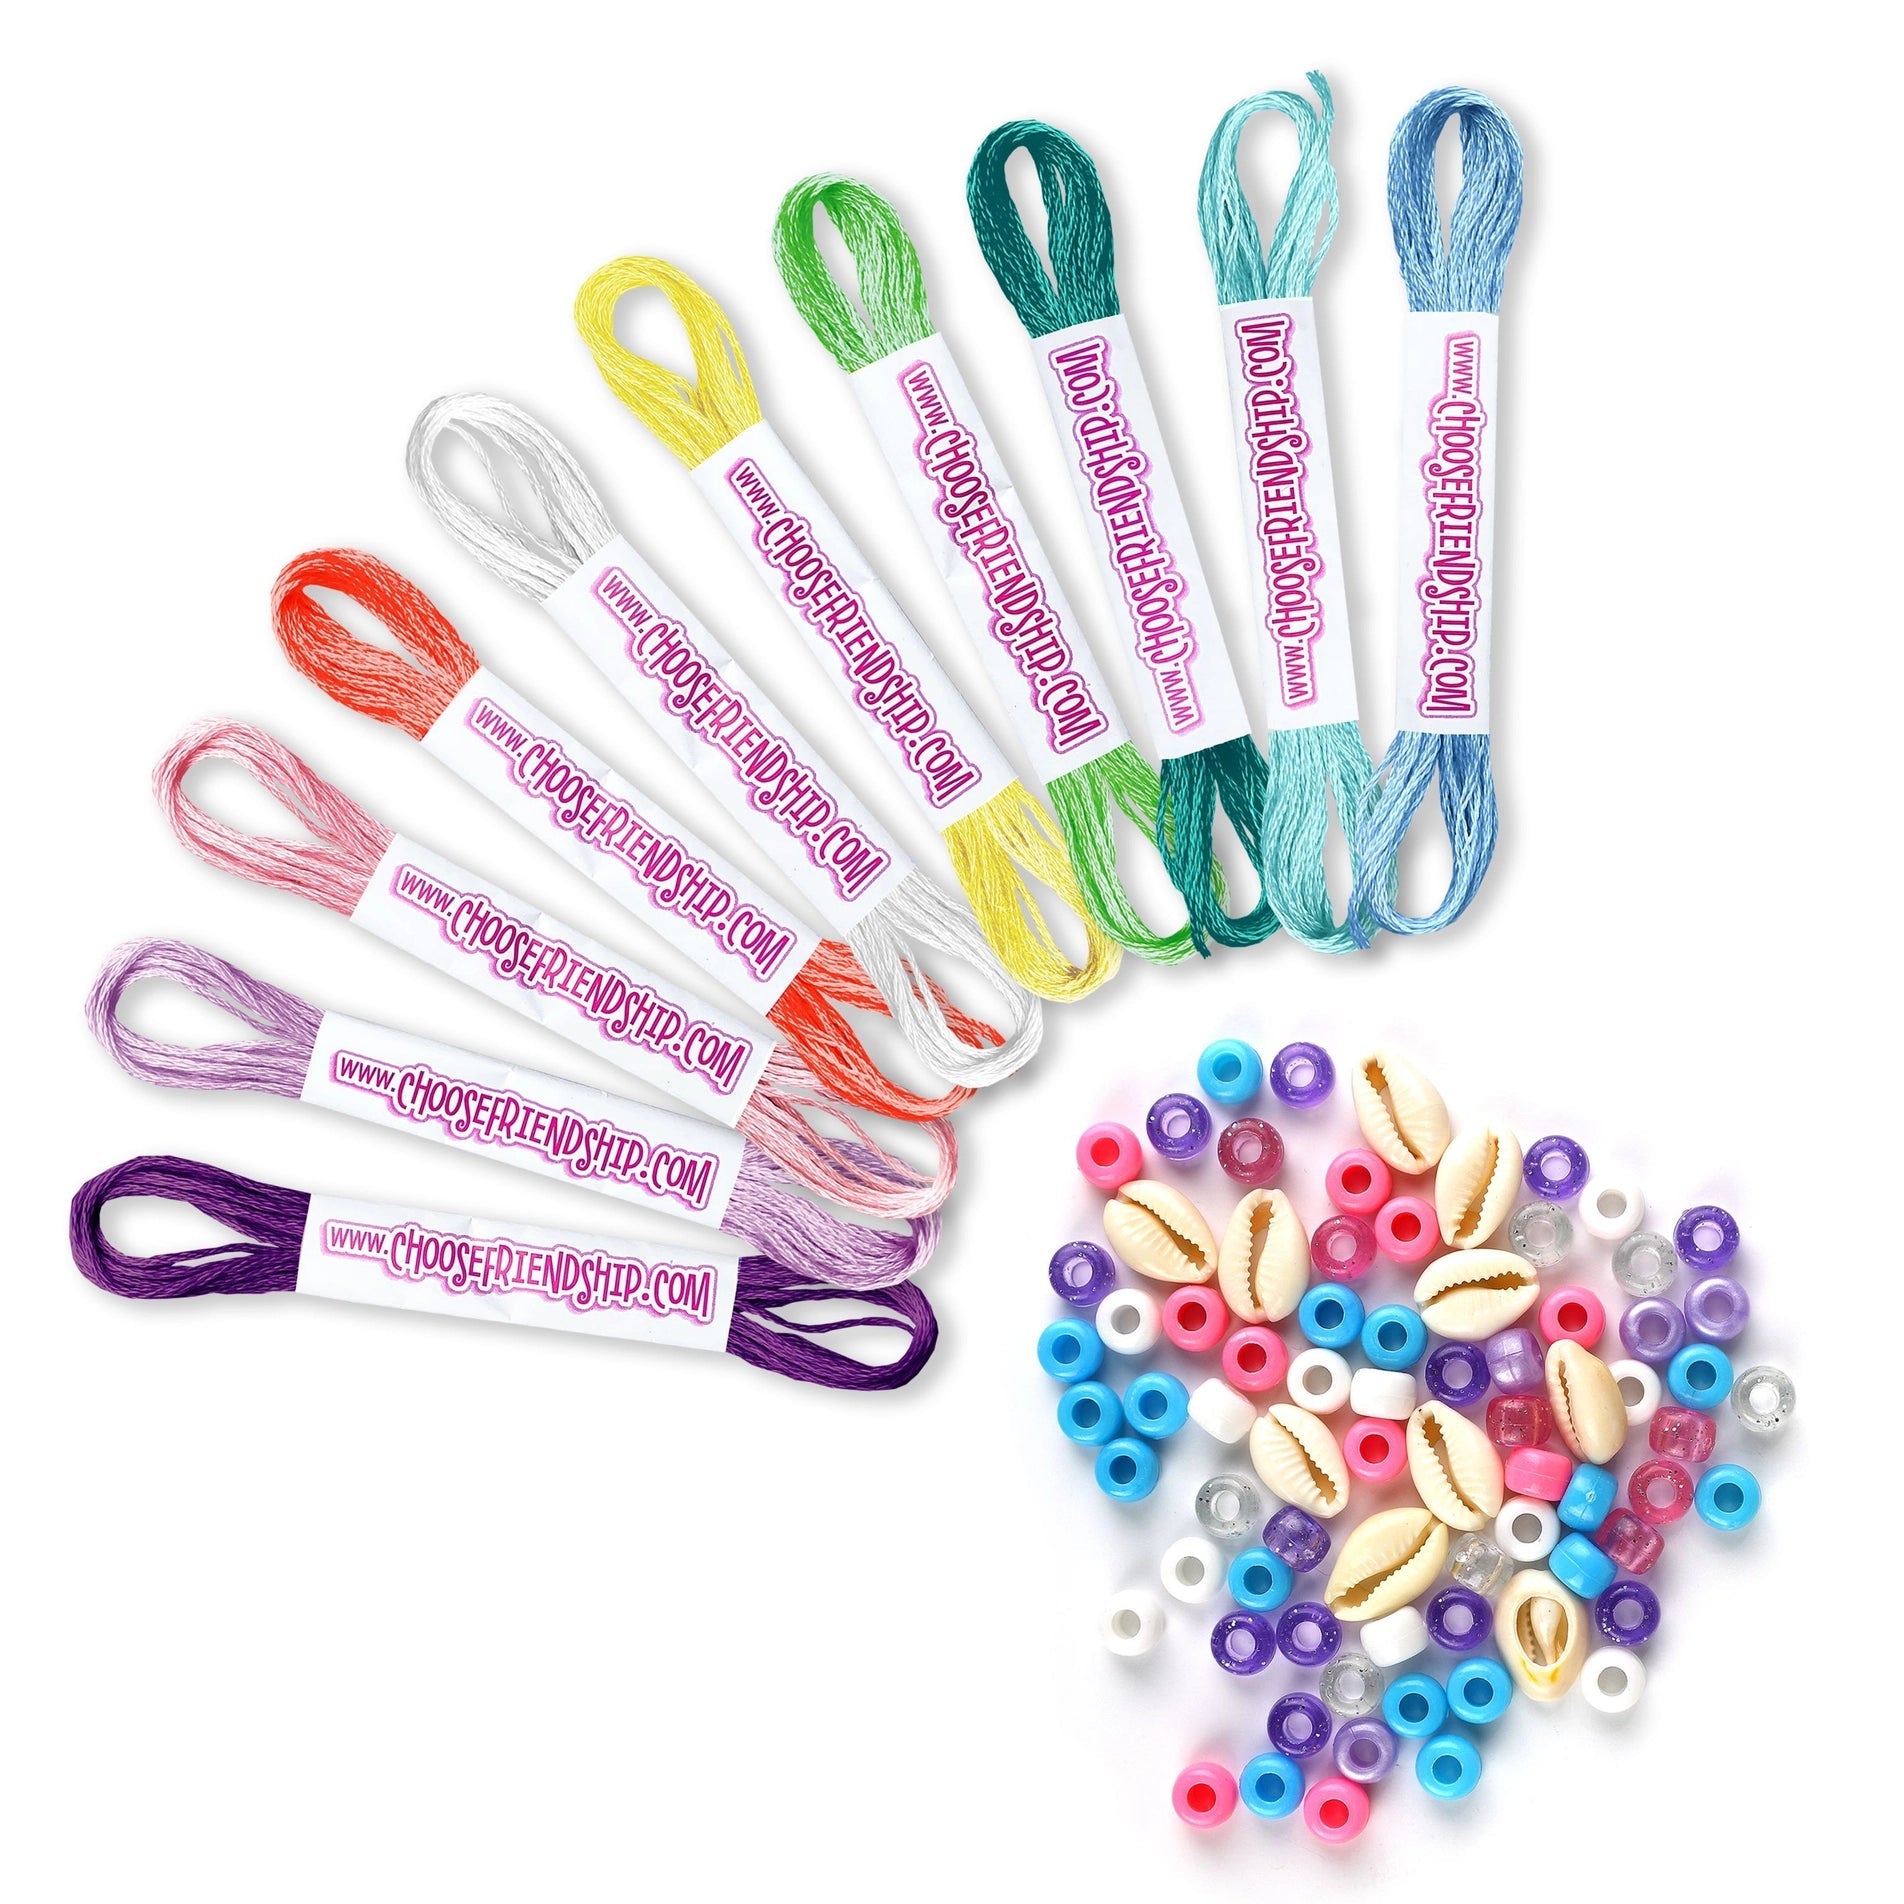  Choose Friendship, My Friendship Bracelet Maker Be Brilliant  Expansion Pack, 80 Pre-Cut Threads and 75 Beads/Charms, Makes 16-32  Bracelets (Embroidery Floss) : Toys & Games